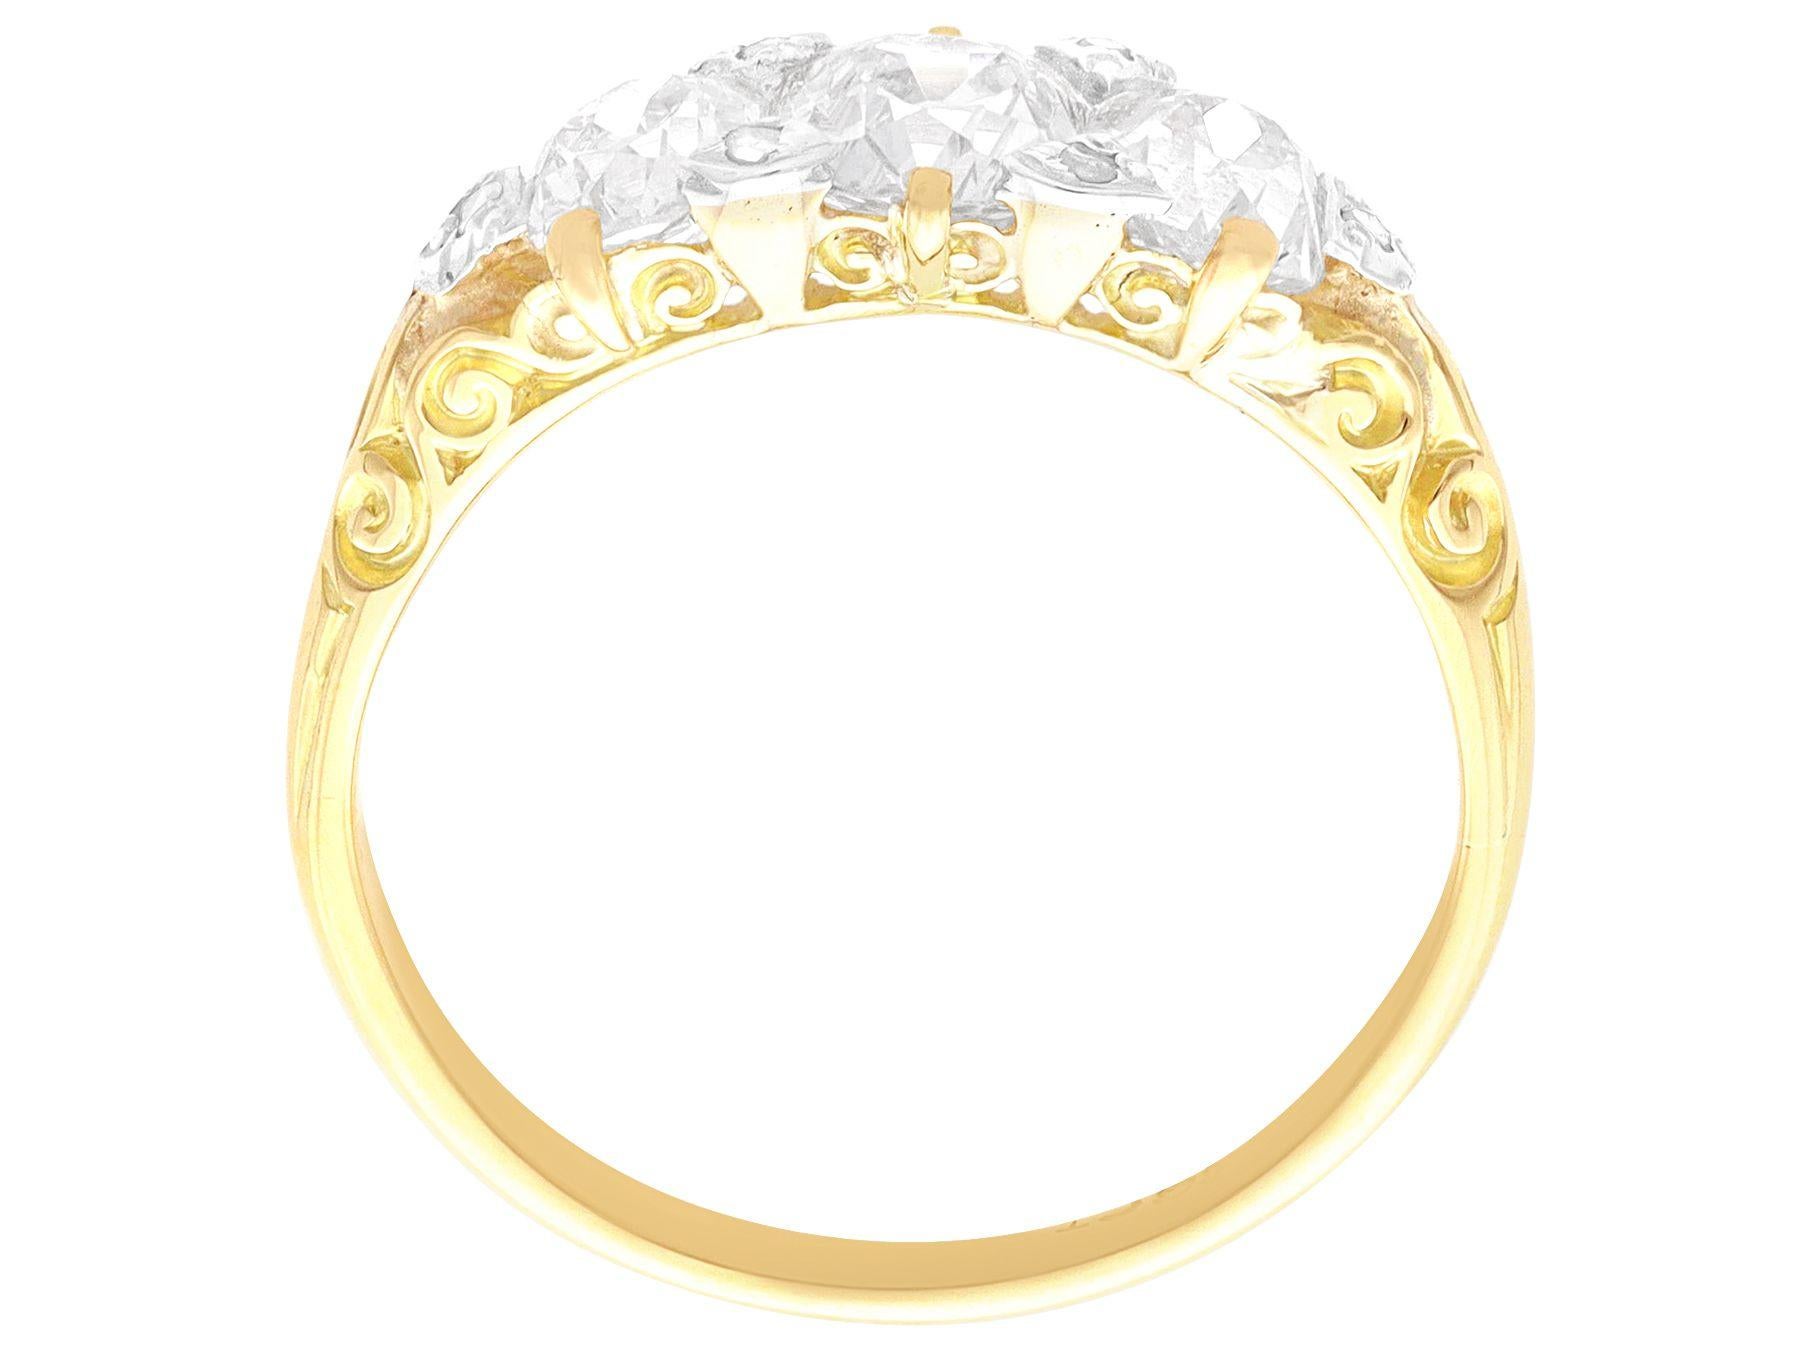 Women's or Men's Antique 2.23 Carat Diamond and 18k Yellow Gold Trilogy Ring, circa 1900 For Sale